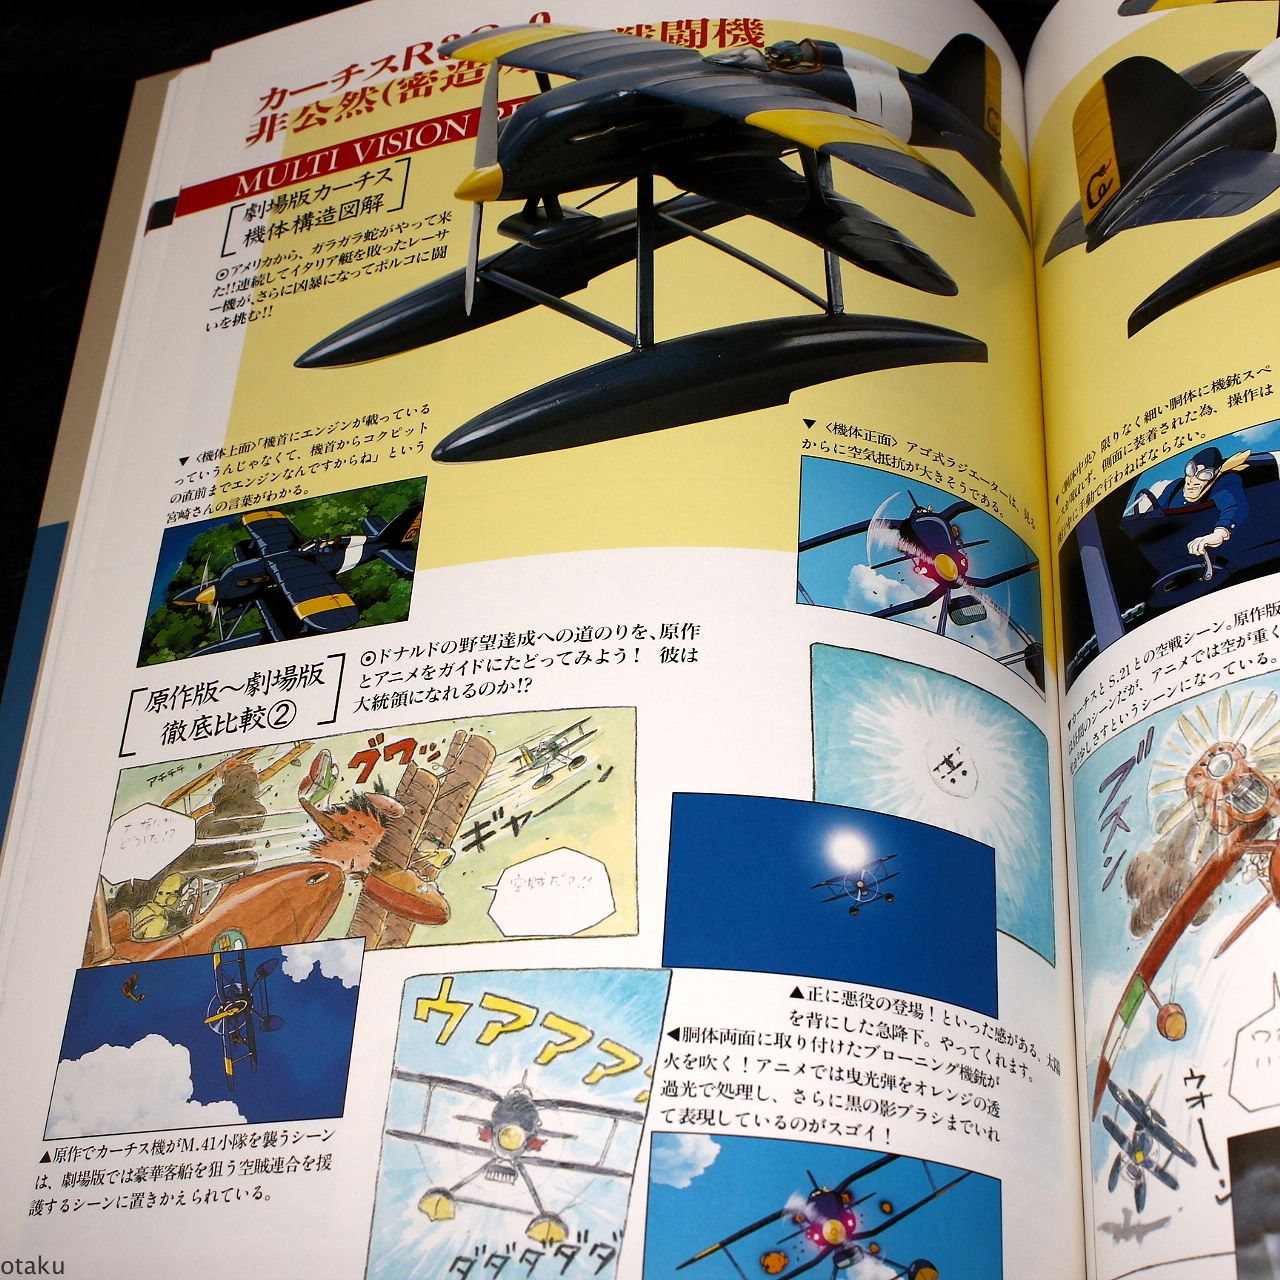 The Art of Porco Rosso, Book by Hayao Miyazaki